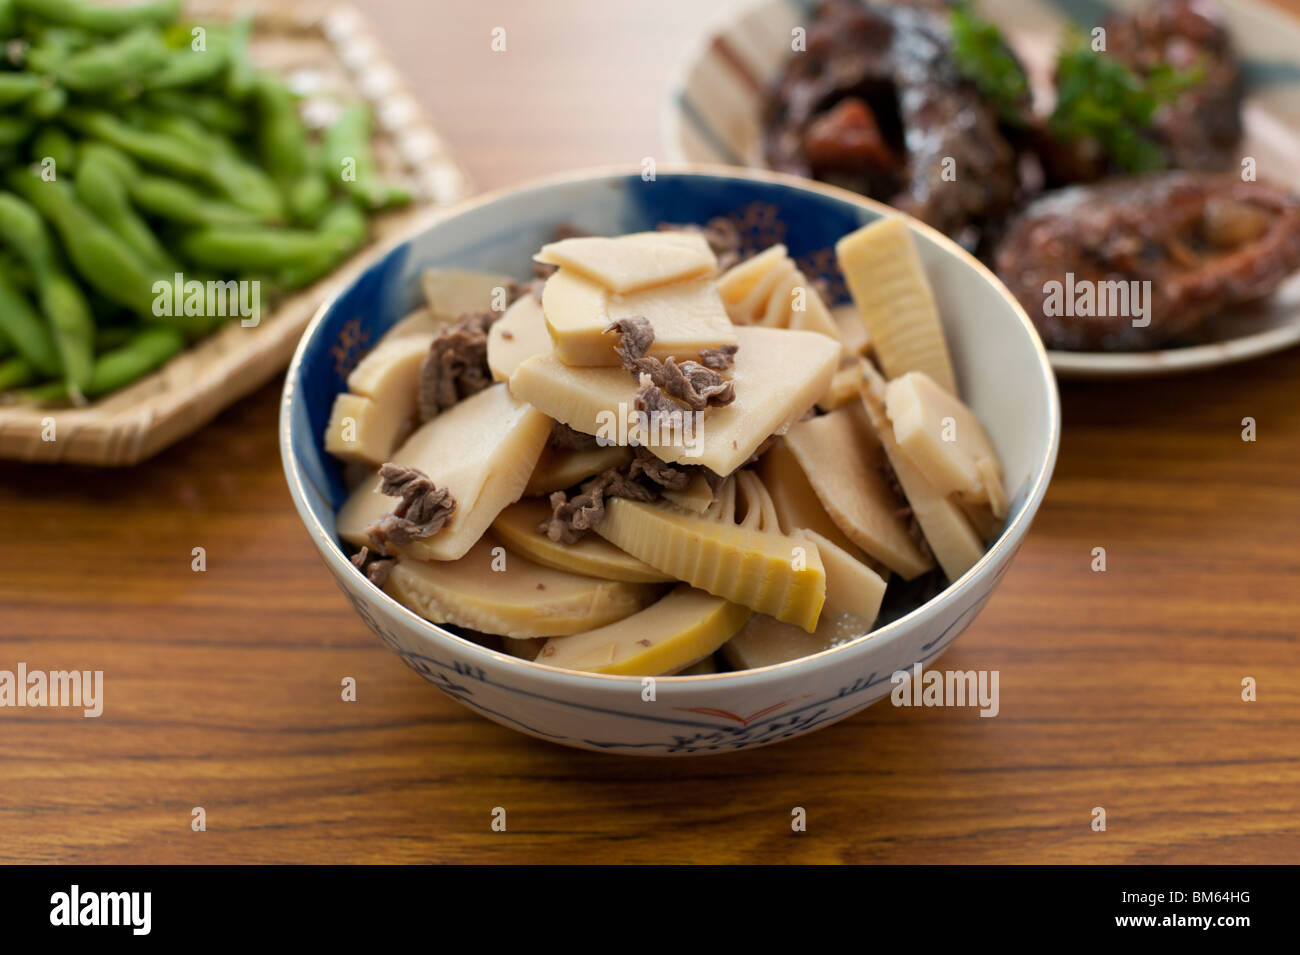 Takenoko - Japanese bamboo shoots - cooked with slivers of meat and served in a typically Japanese bowl Stock Photo